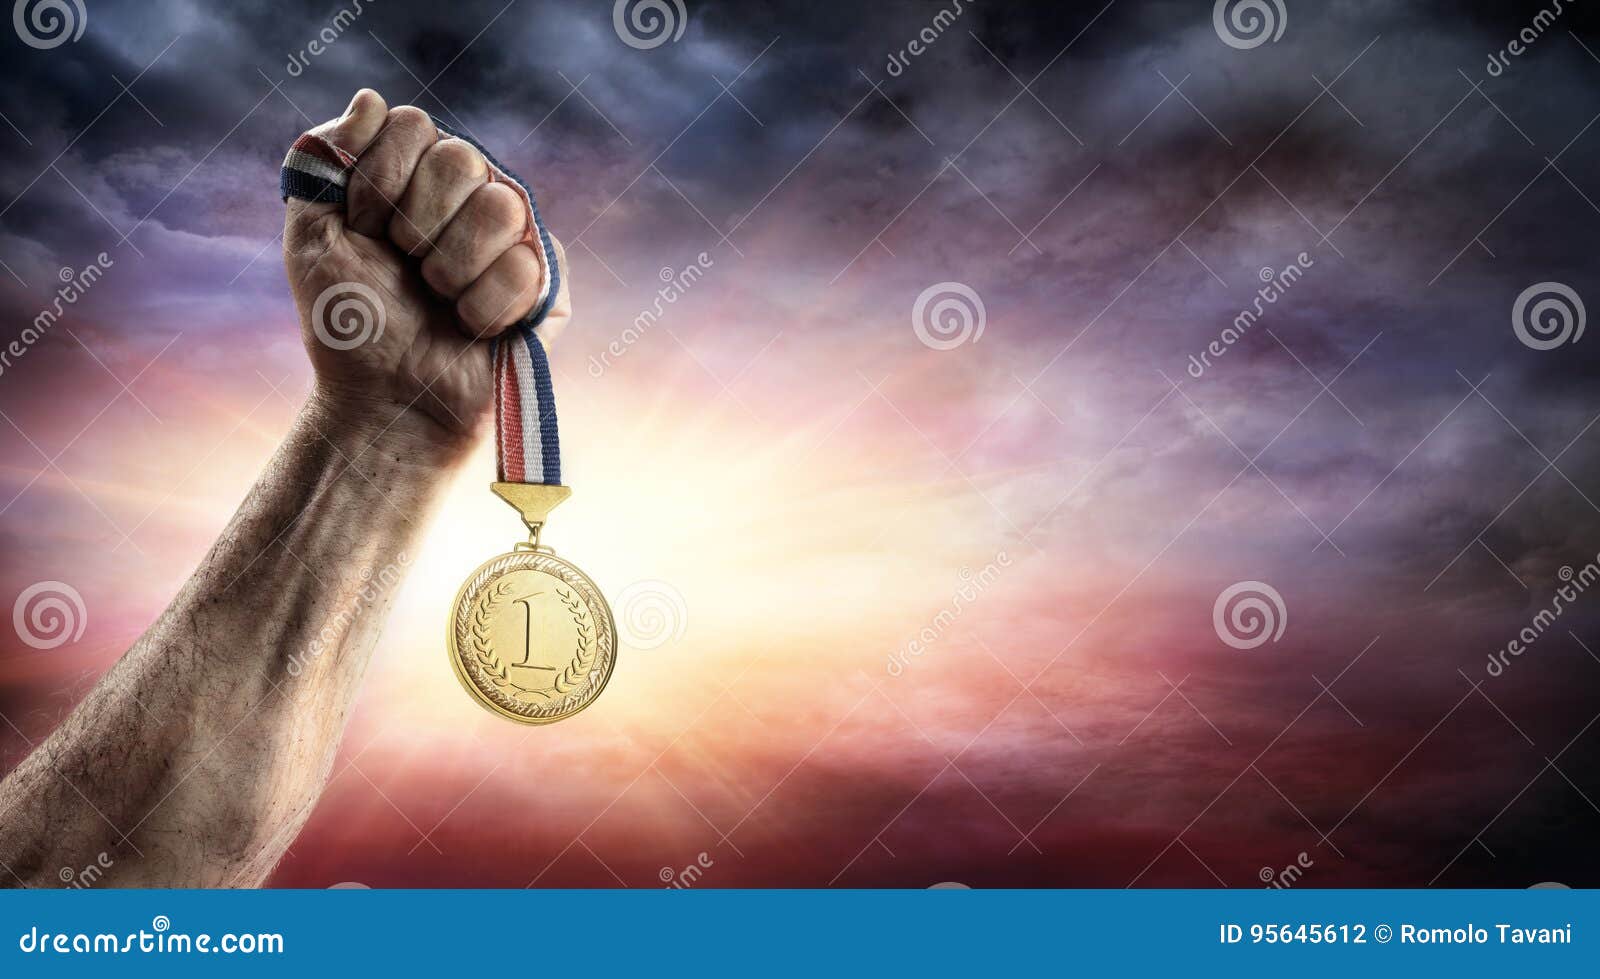 medal of first place in hand